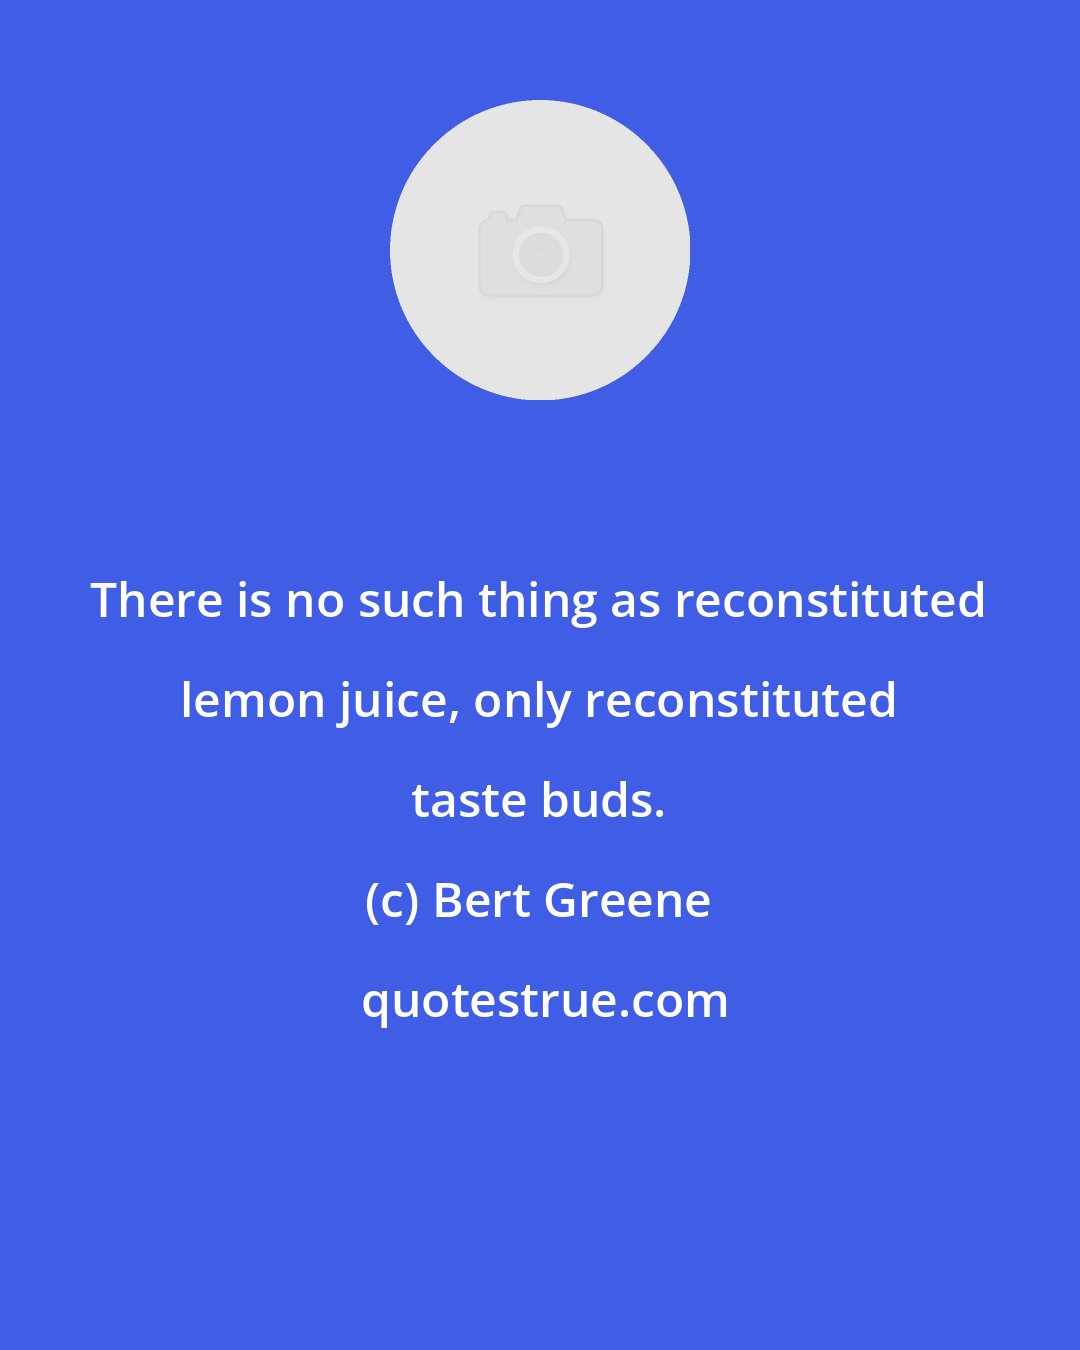 Bert Greene: There is no such thing as reconstituted lemon juice, only reconstituted taste buds.